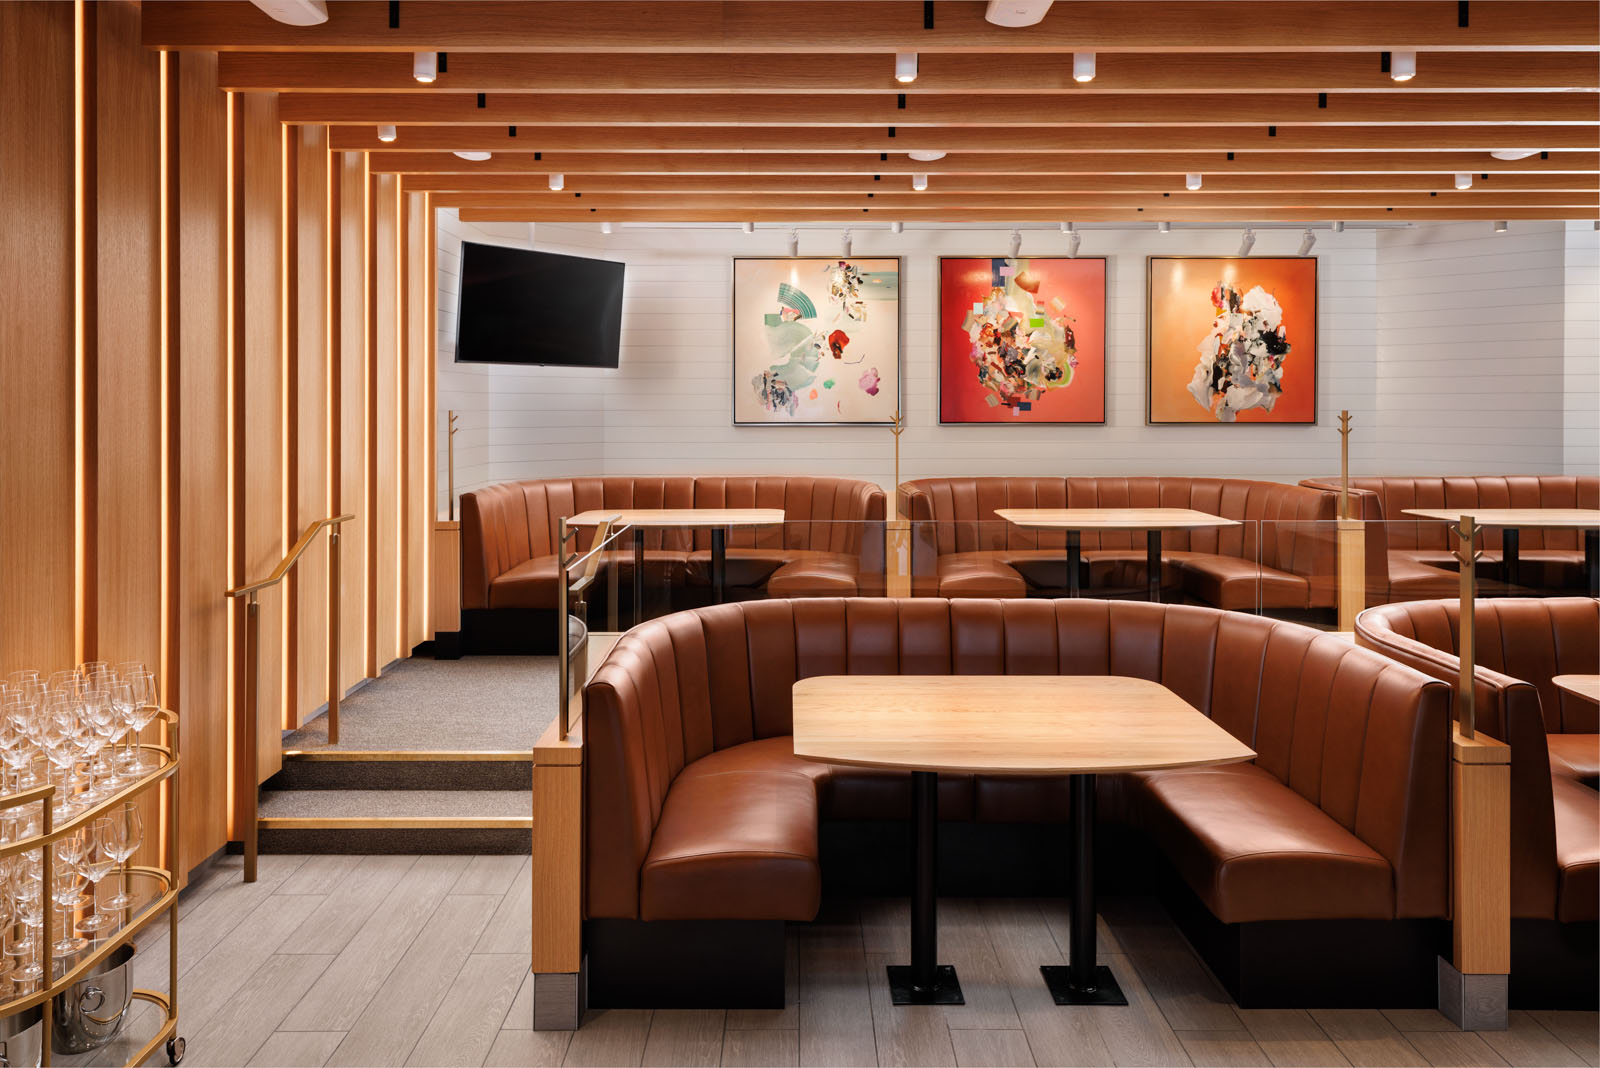 King Taps Kelowna Architectural Interior of Restaurant Seating. Features Interior Design, Booth Seating, Artwork and Construction Quality.